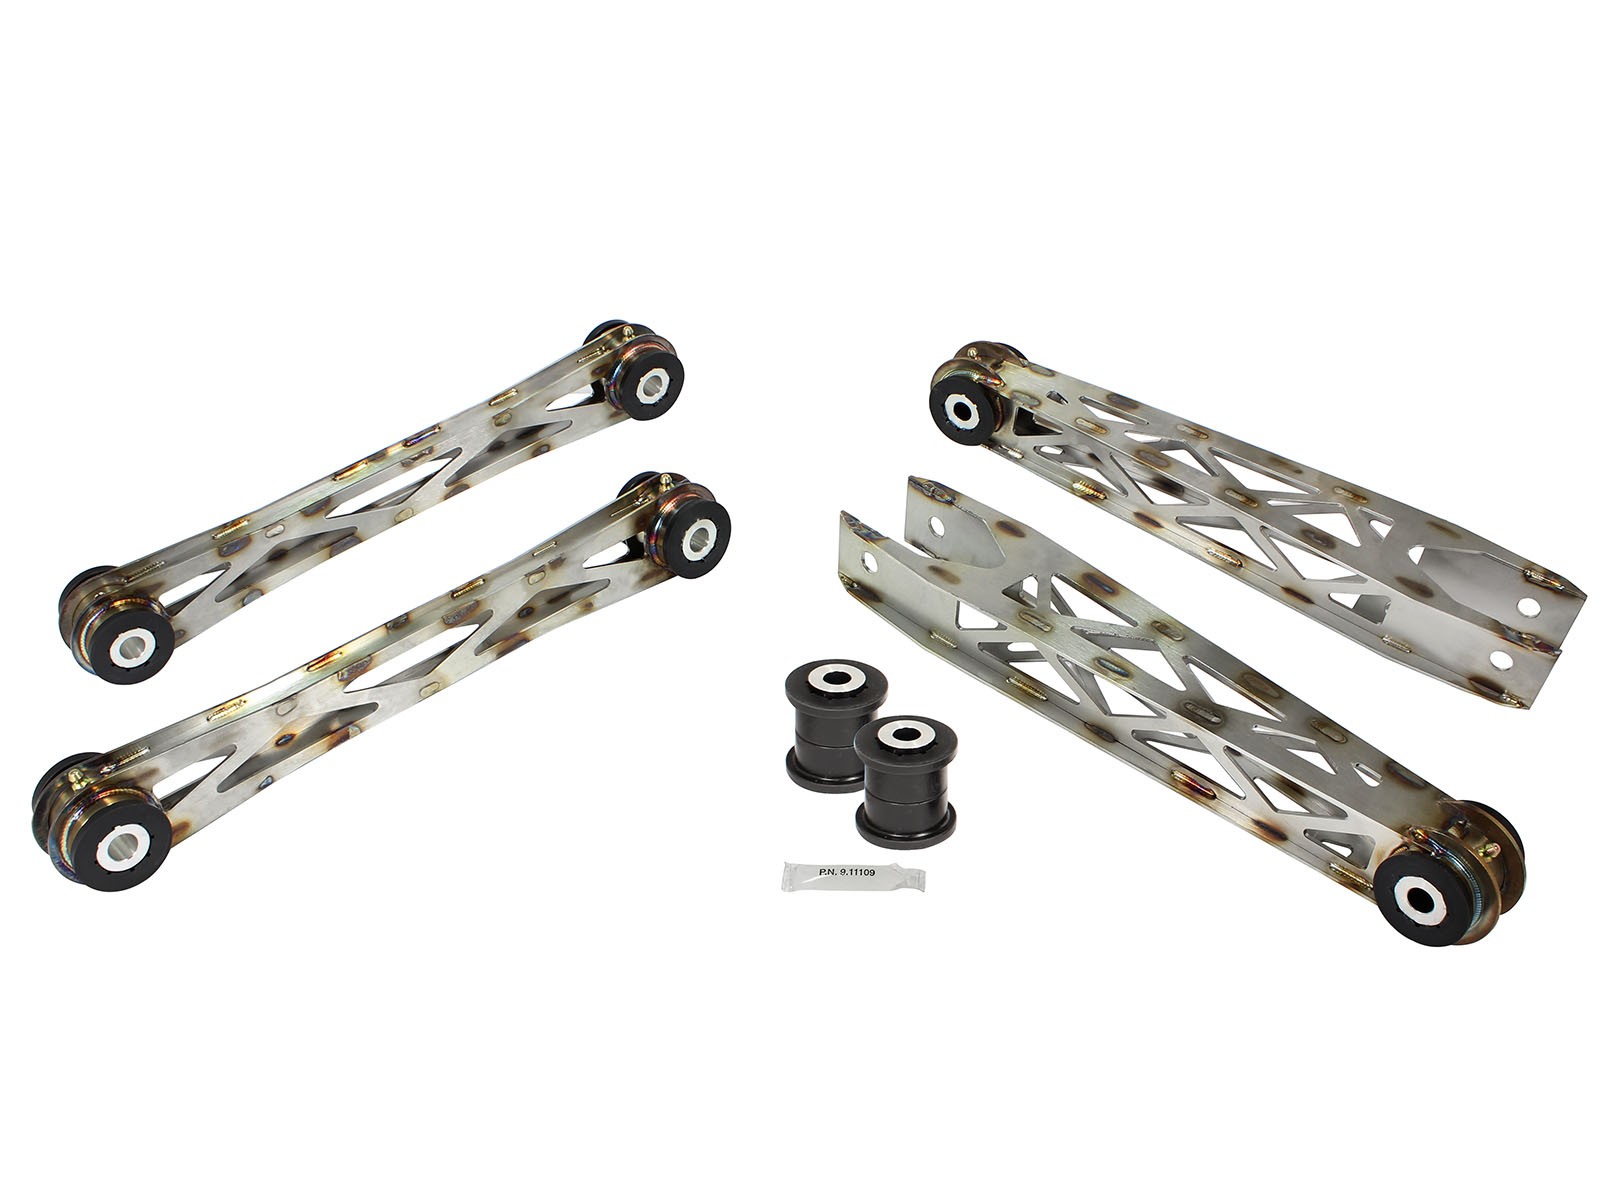 Pfadt / aFe Control 2010-2015 Camaro Rear Trailing Arm Kit and Tie Rods